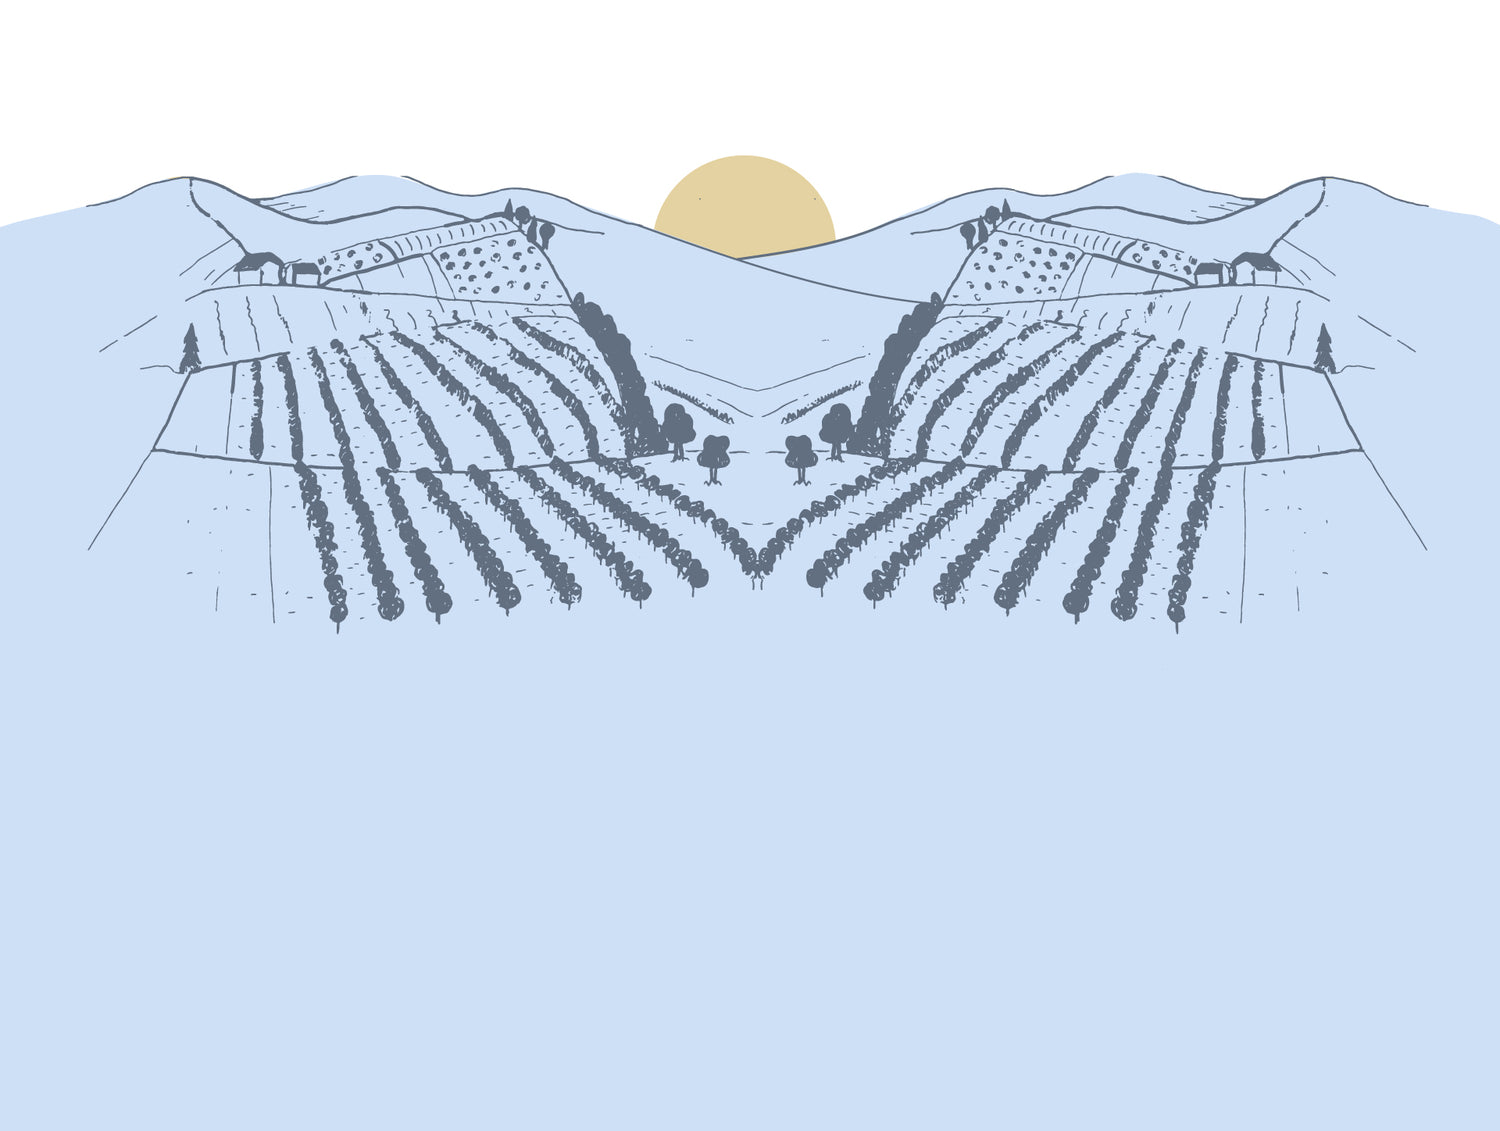 Illustration of Sun peaking over mountains with houses and groves